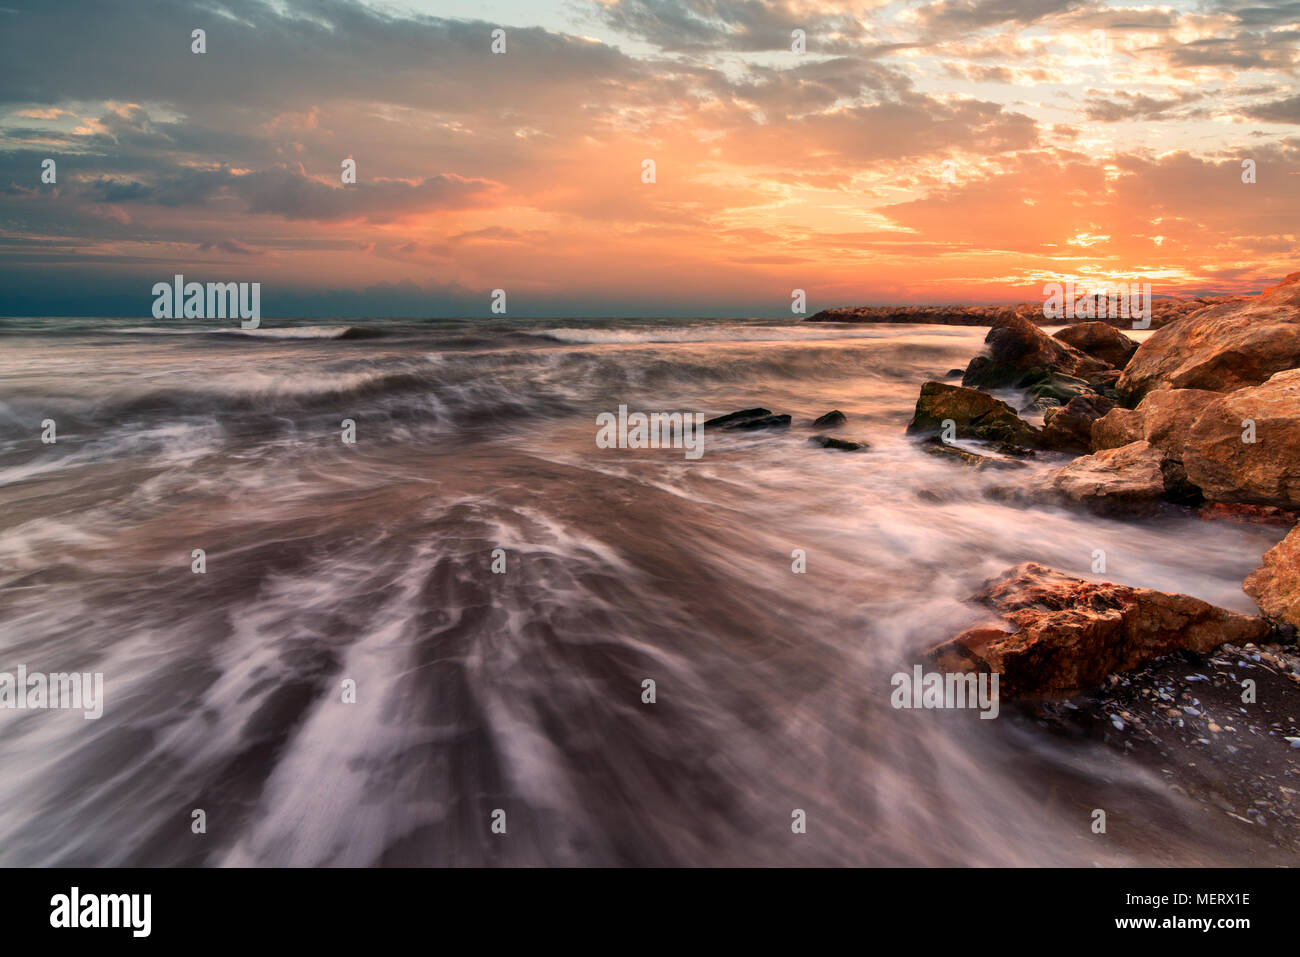 Sunrise over the sea. Stone on the foreground. Stock Photo